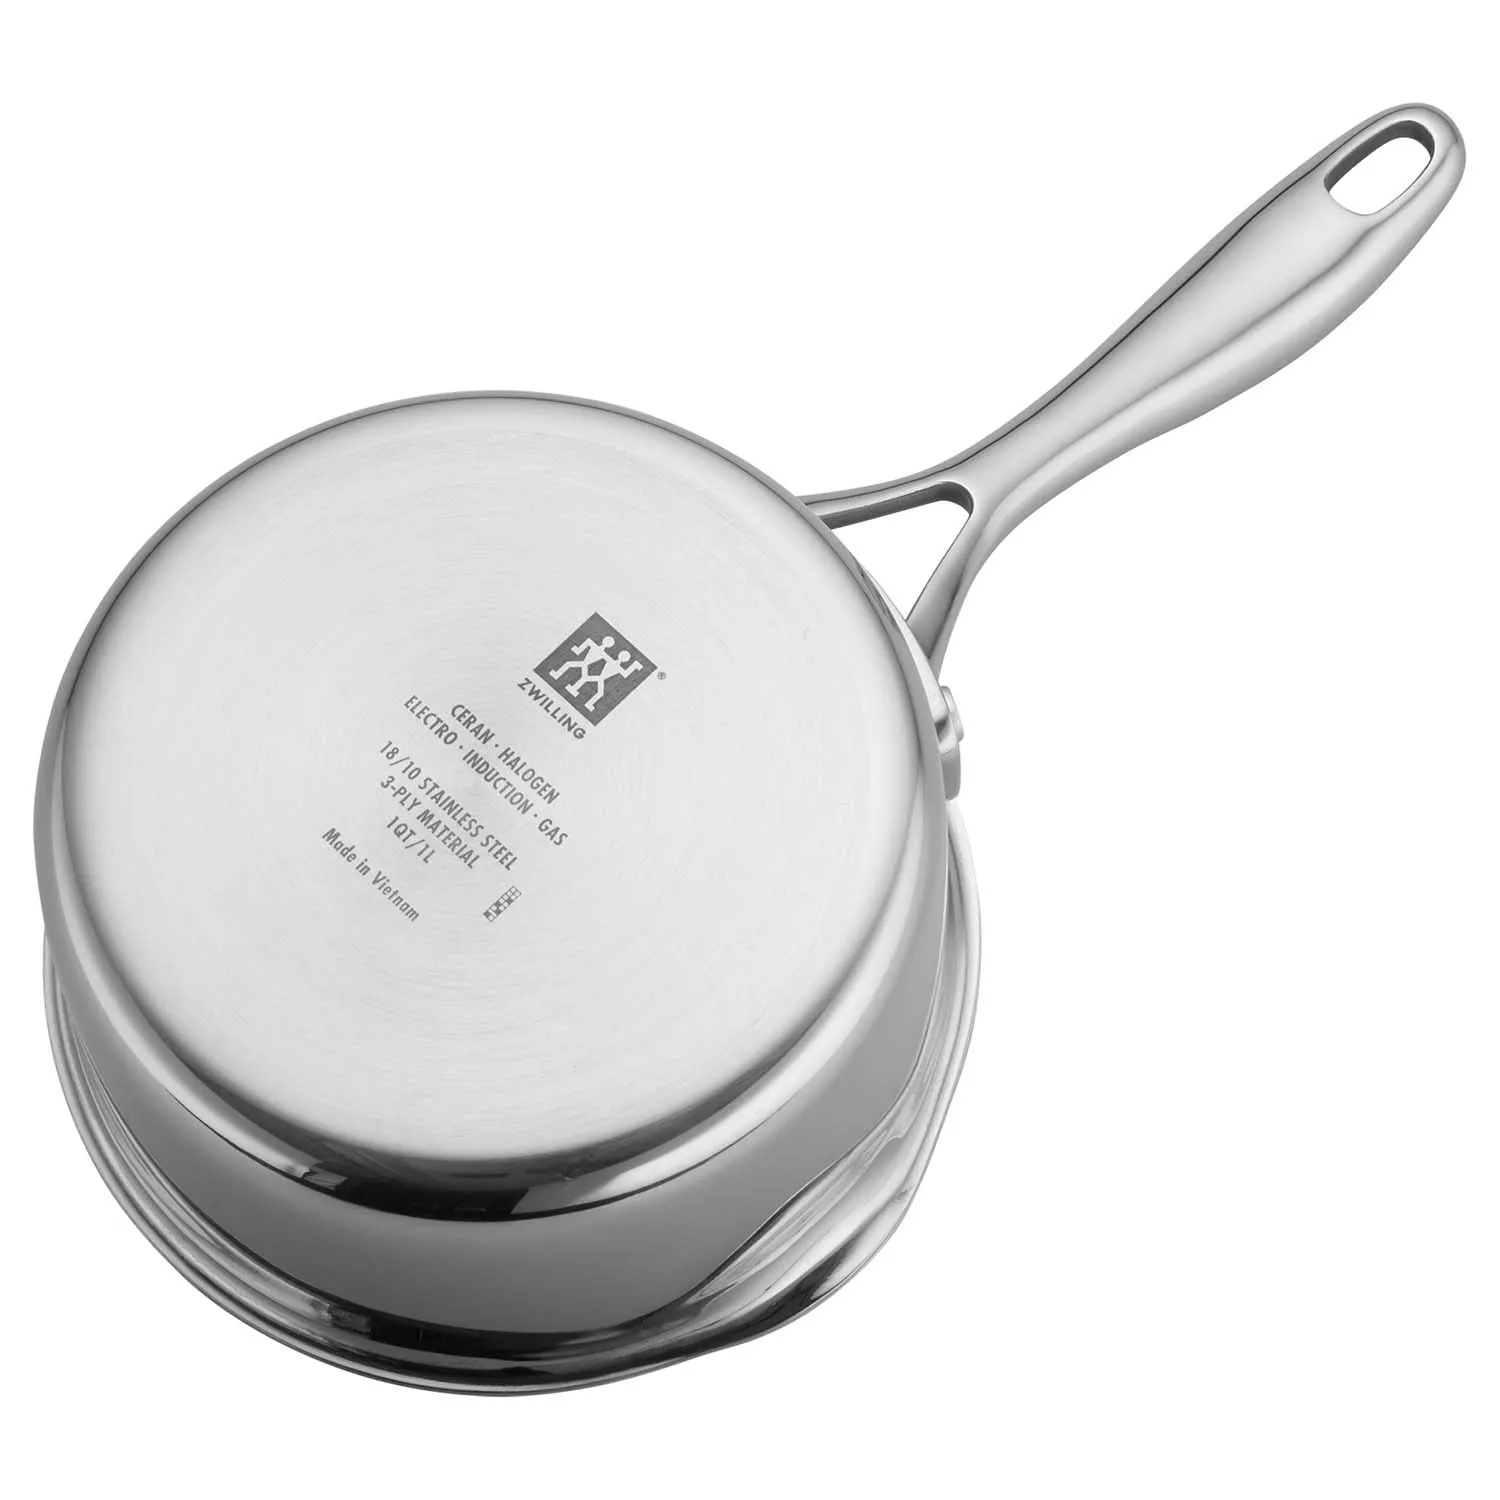 ZWILLING J.A. Henckels Zwilling Clad CFX 10-piece Stainless Steel Ceramic  Nonstick Cookware Set & Reviews